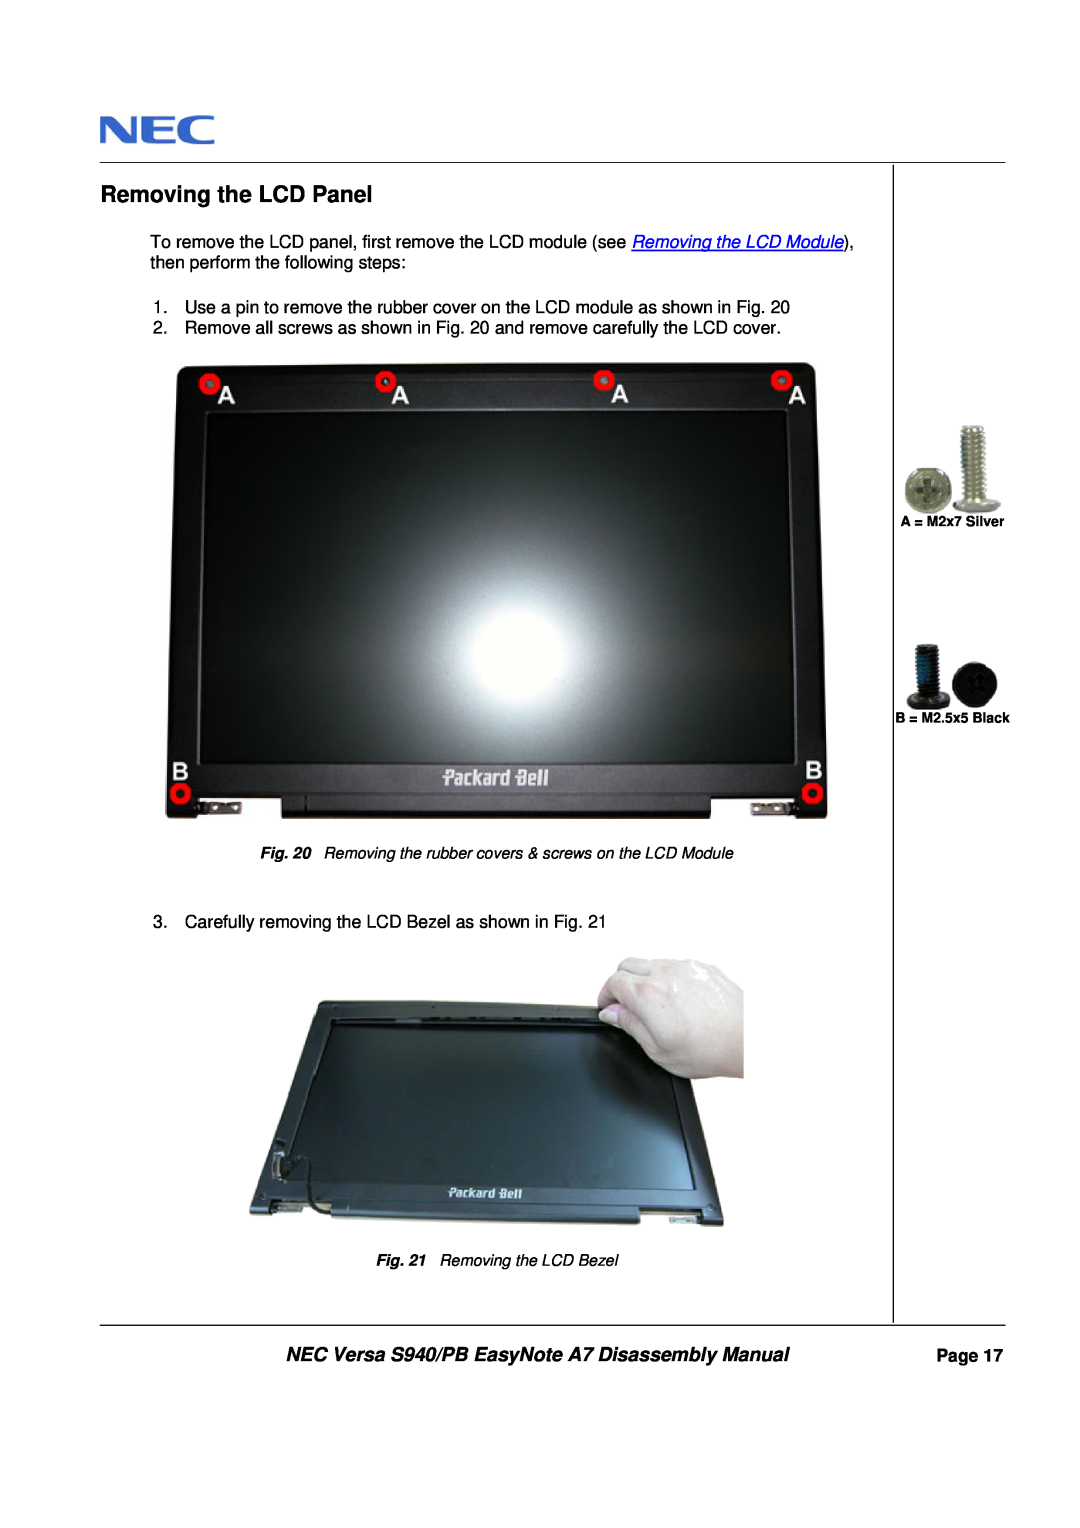 Packard Bell manual Removing the LCD Panel, NEC Versa S940/PB EasyNote A7 Disassembly Manual 